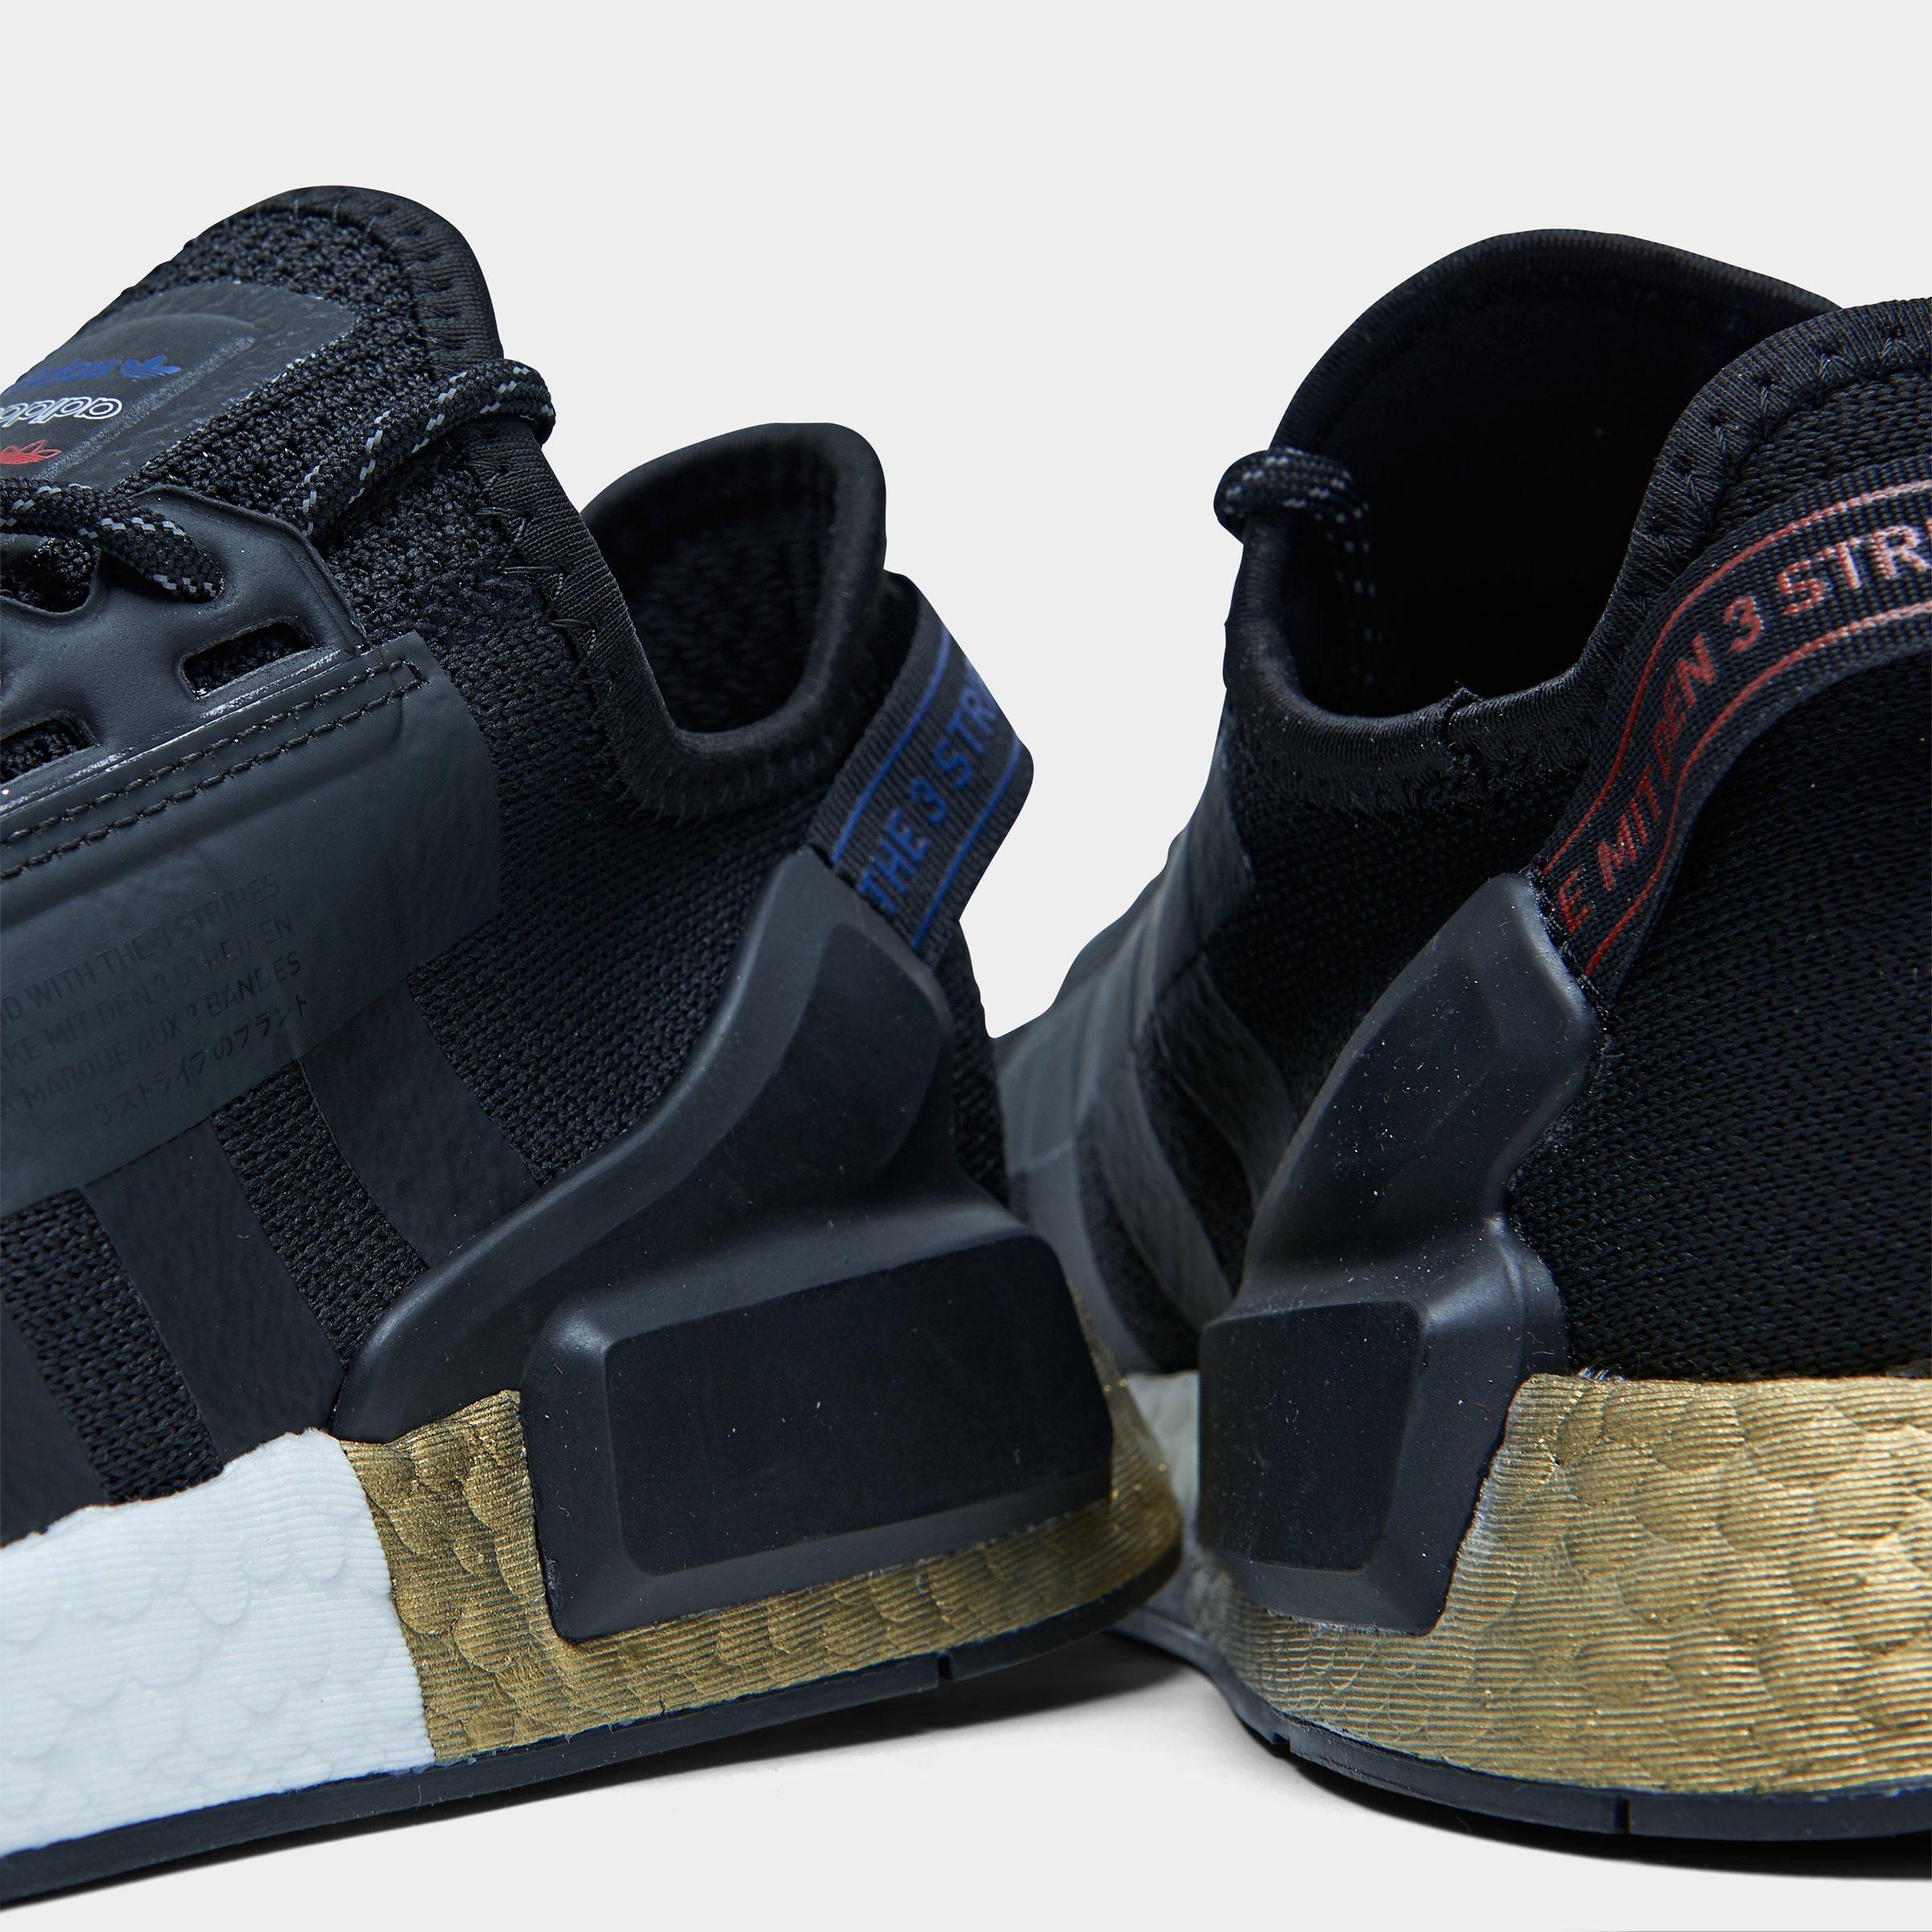 adidas nmd xr1 hp and adidas shoes black and gold Equipped